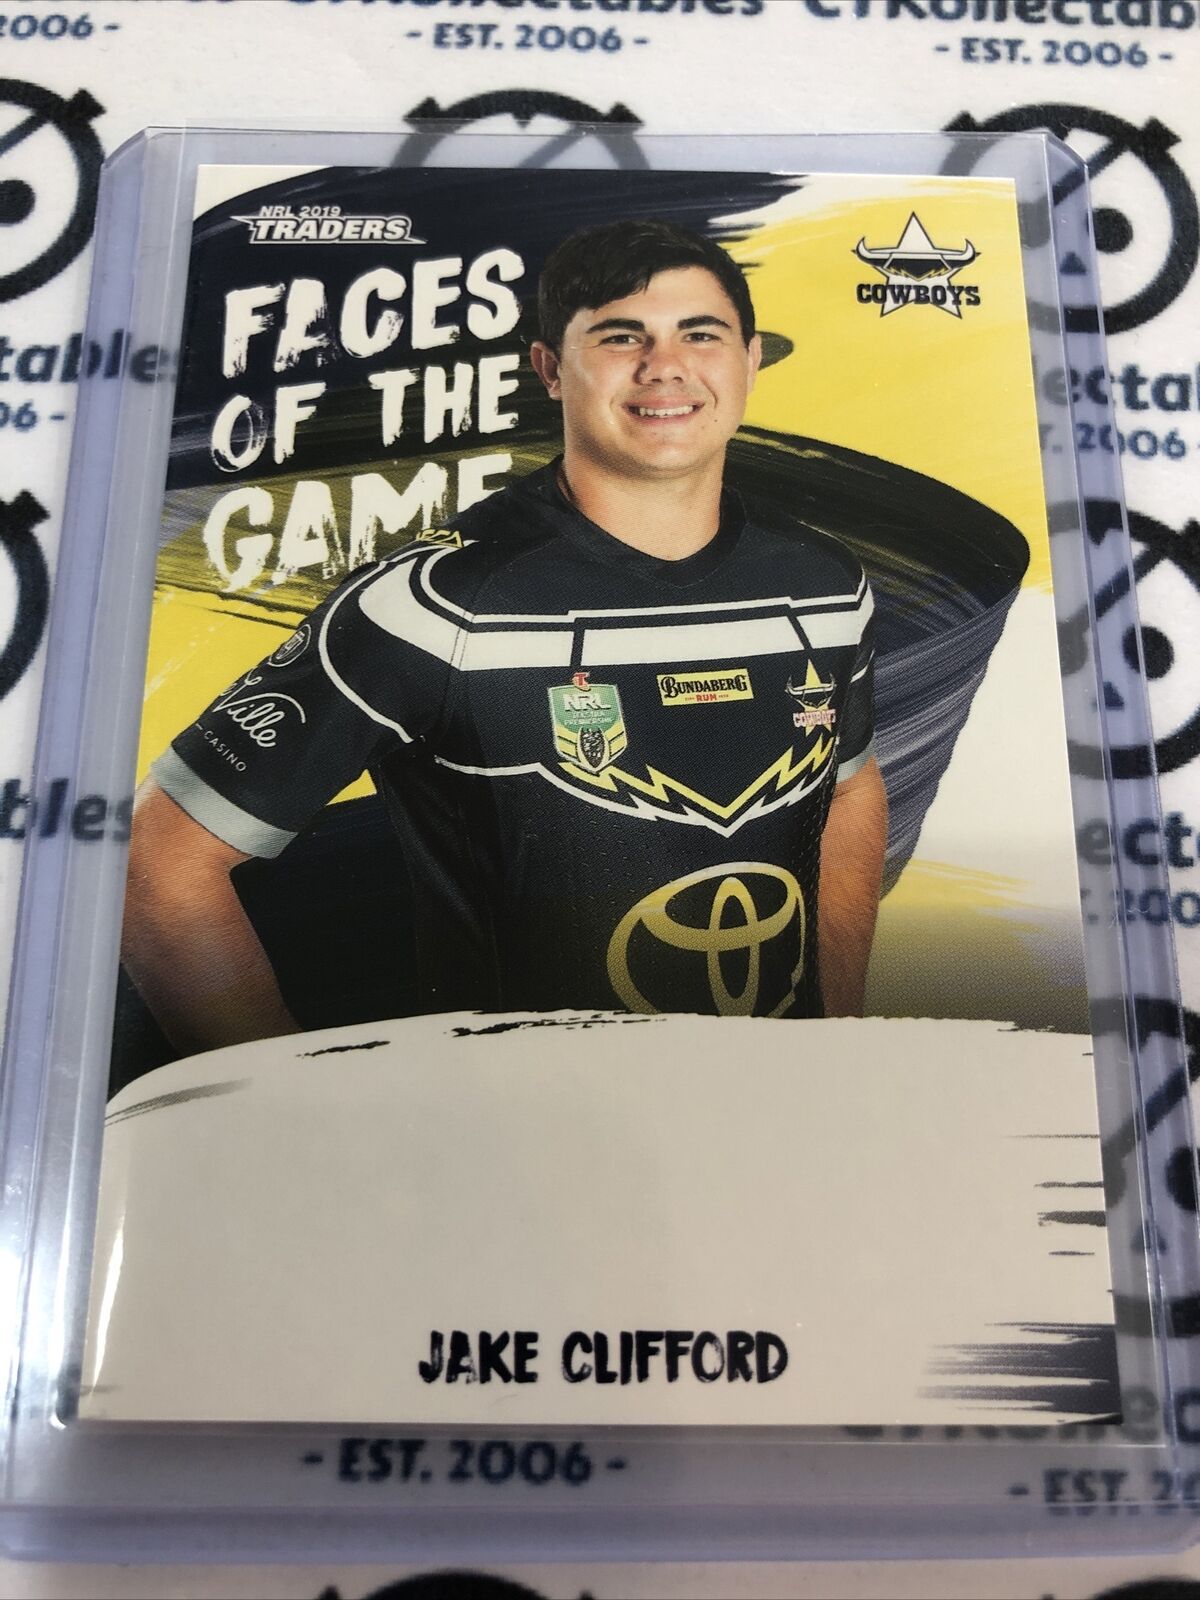 2019 NRL Traders Jake Clifford Face Of The Game FG34/64 Cowboys